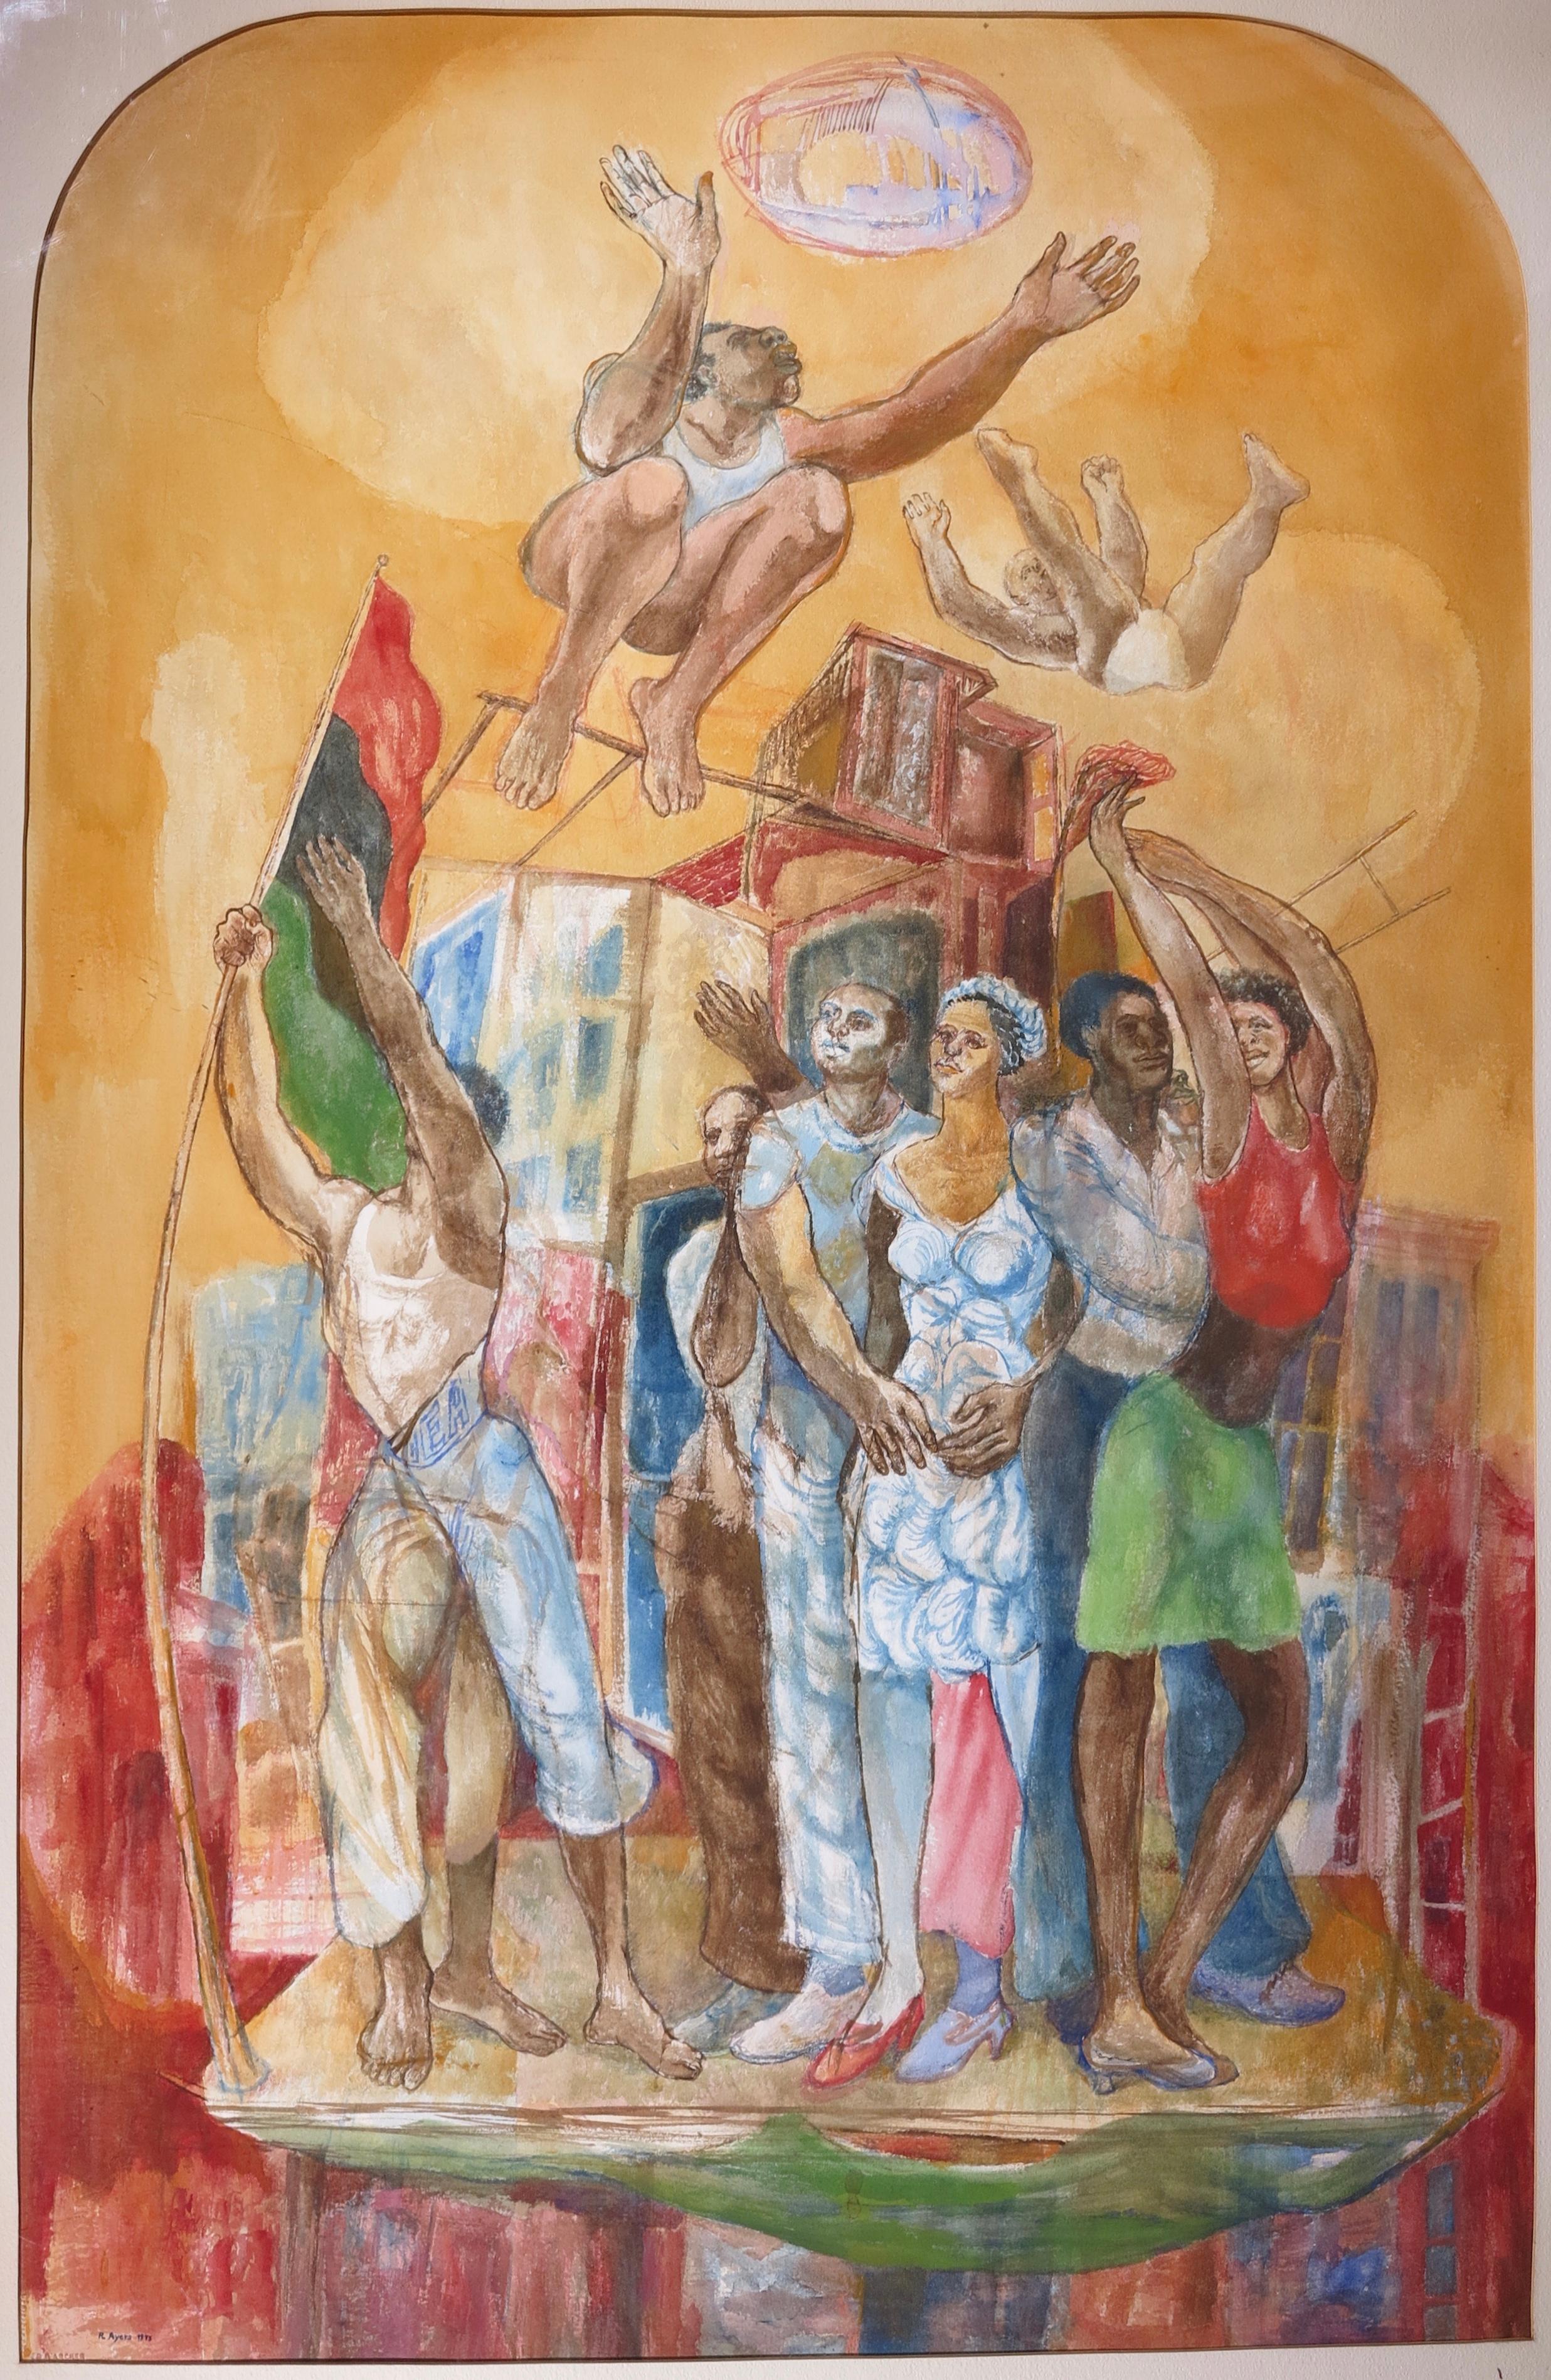 Roland Ayers Figurative Painting - The People (Urban African-American Afrofuturism Landscape)